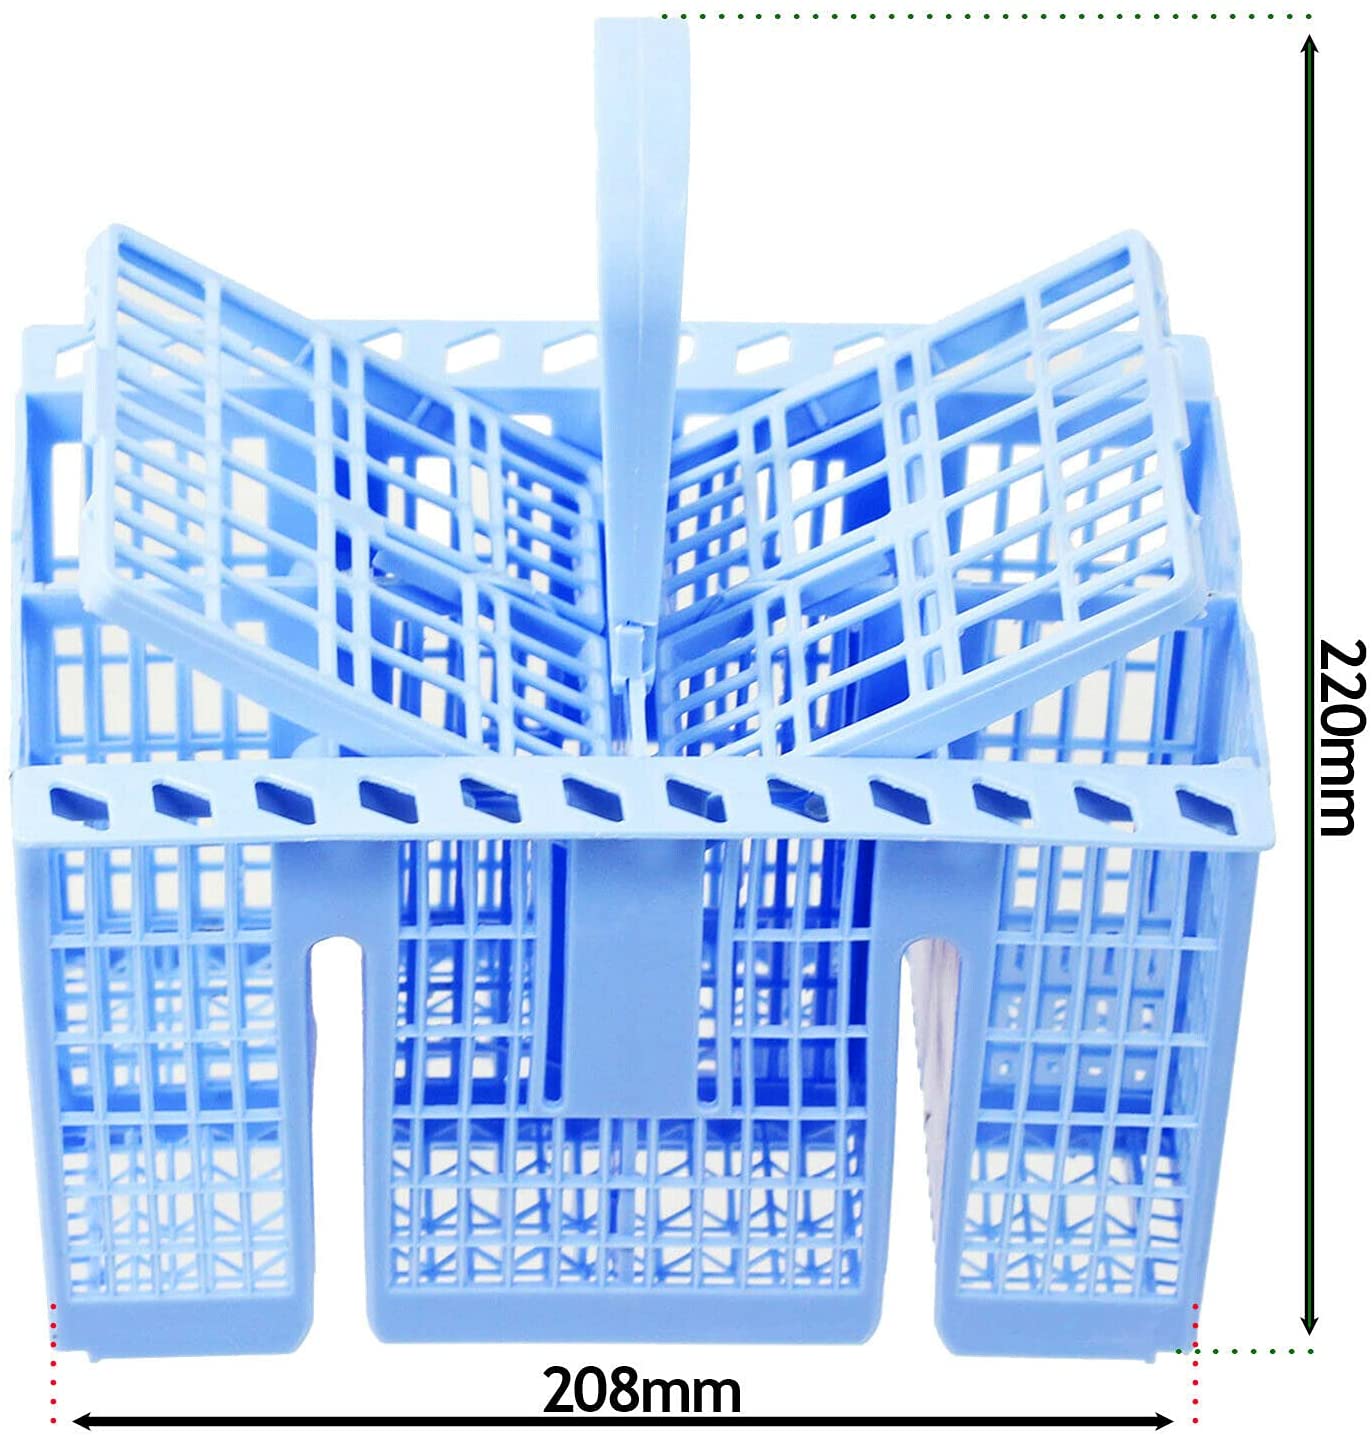 SPARES2GO Cutlery Basket compatible with Servis Dishwasher (Blue, 220 x 208 x 160mm)